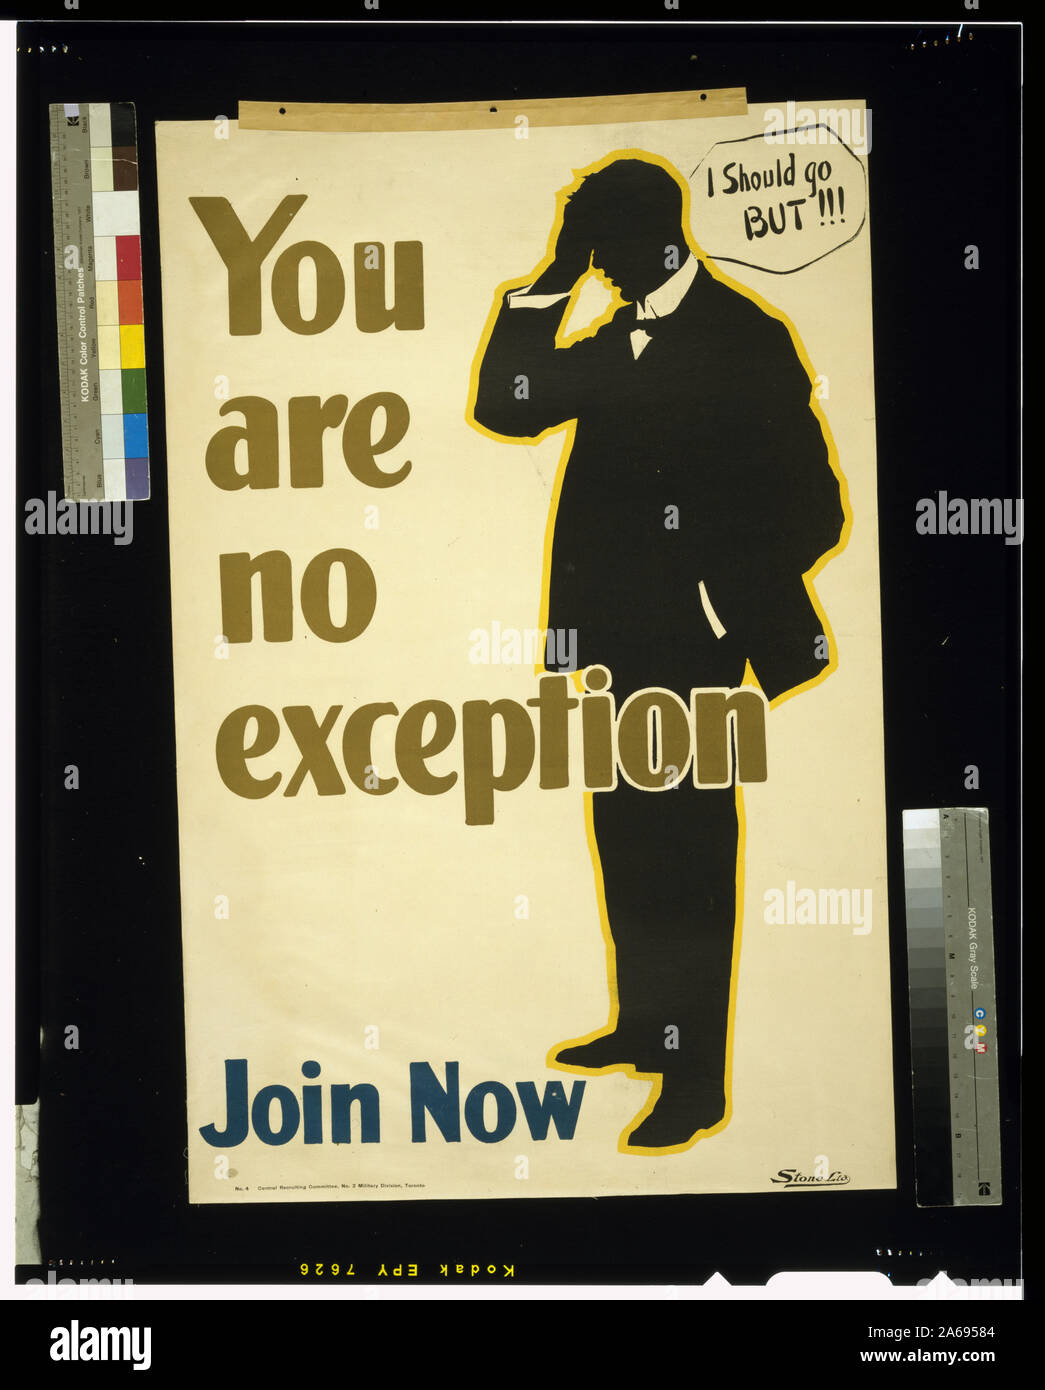 You are no exception. Join now / Stone Ltd. Stock Photo